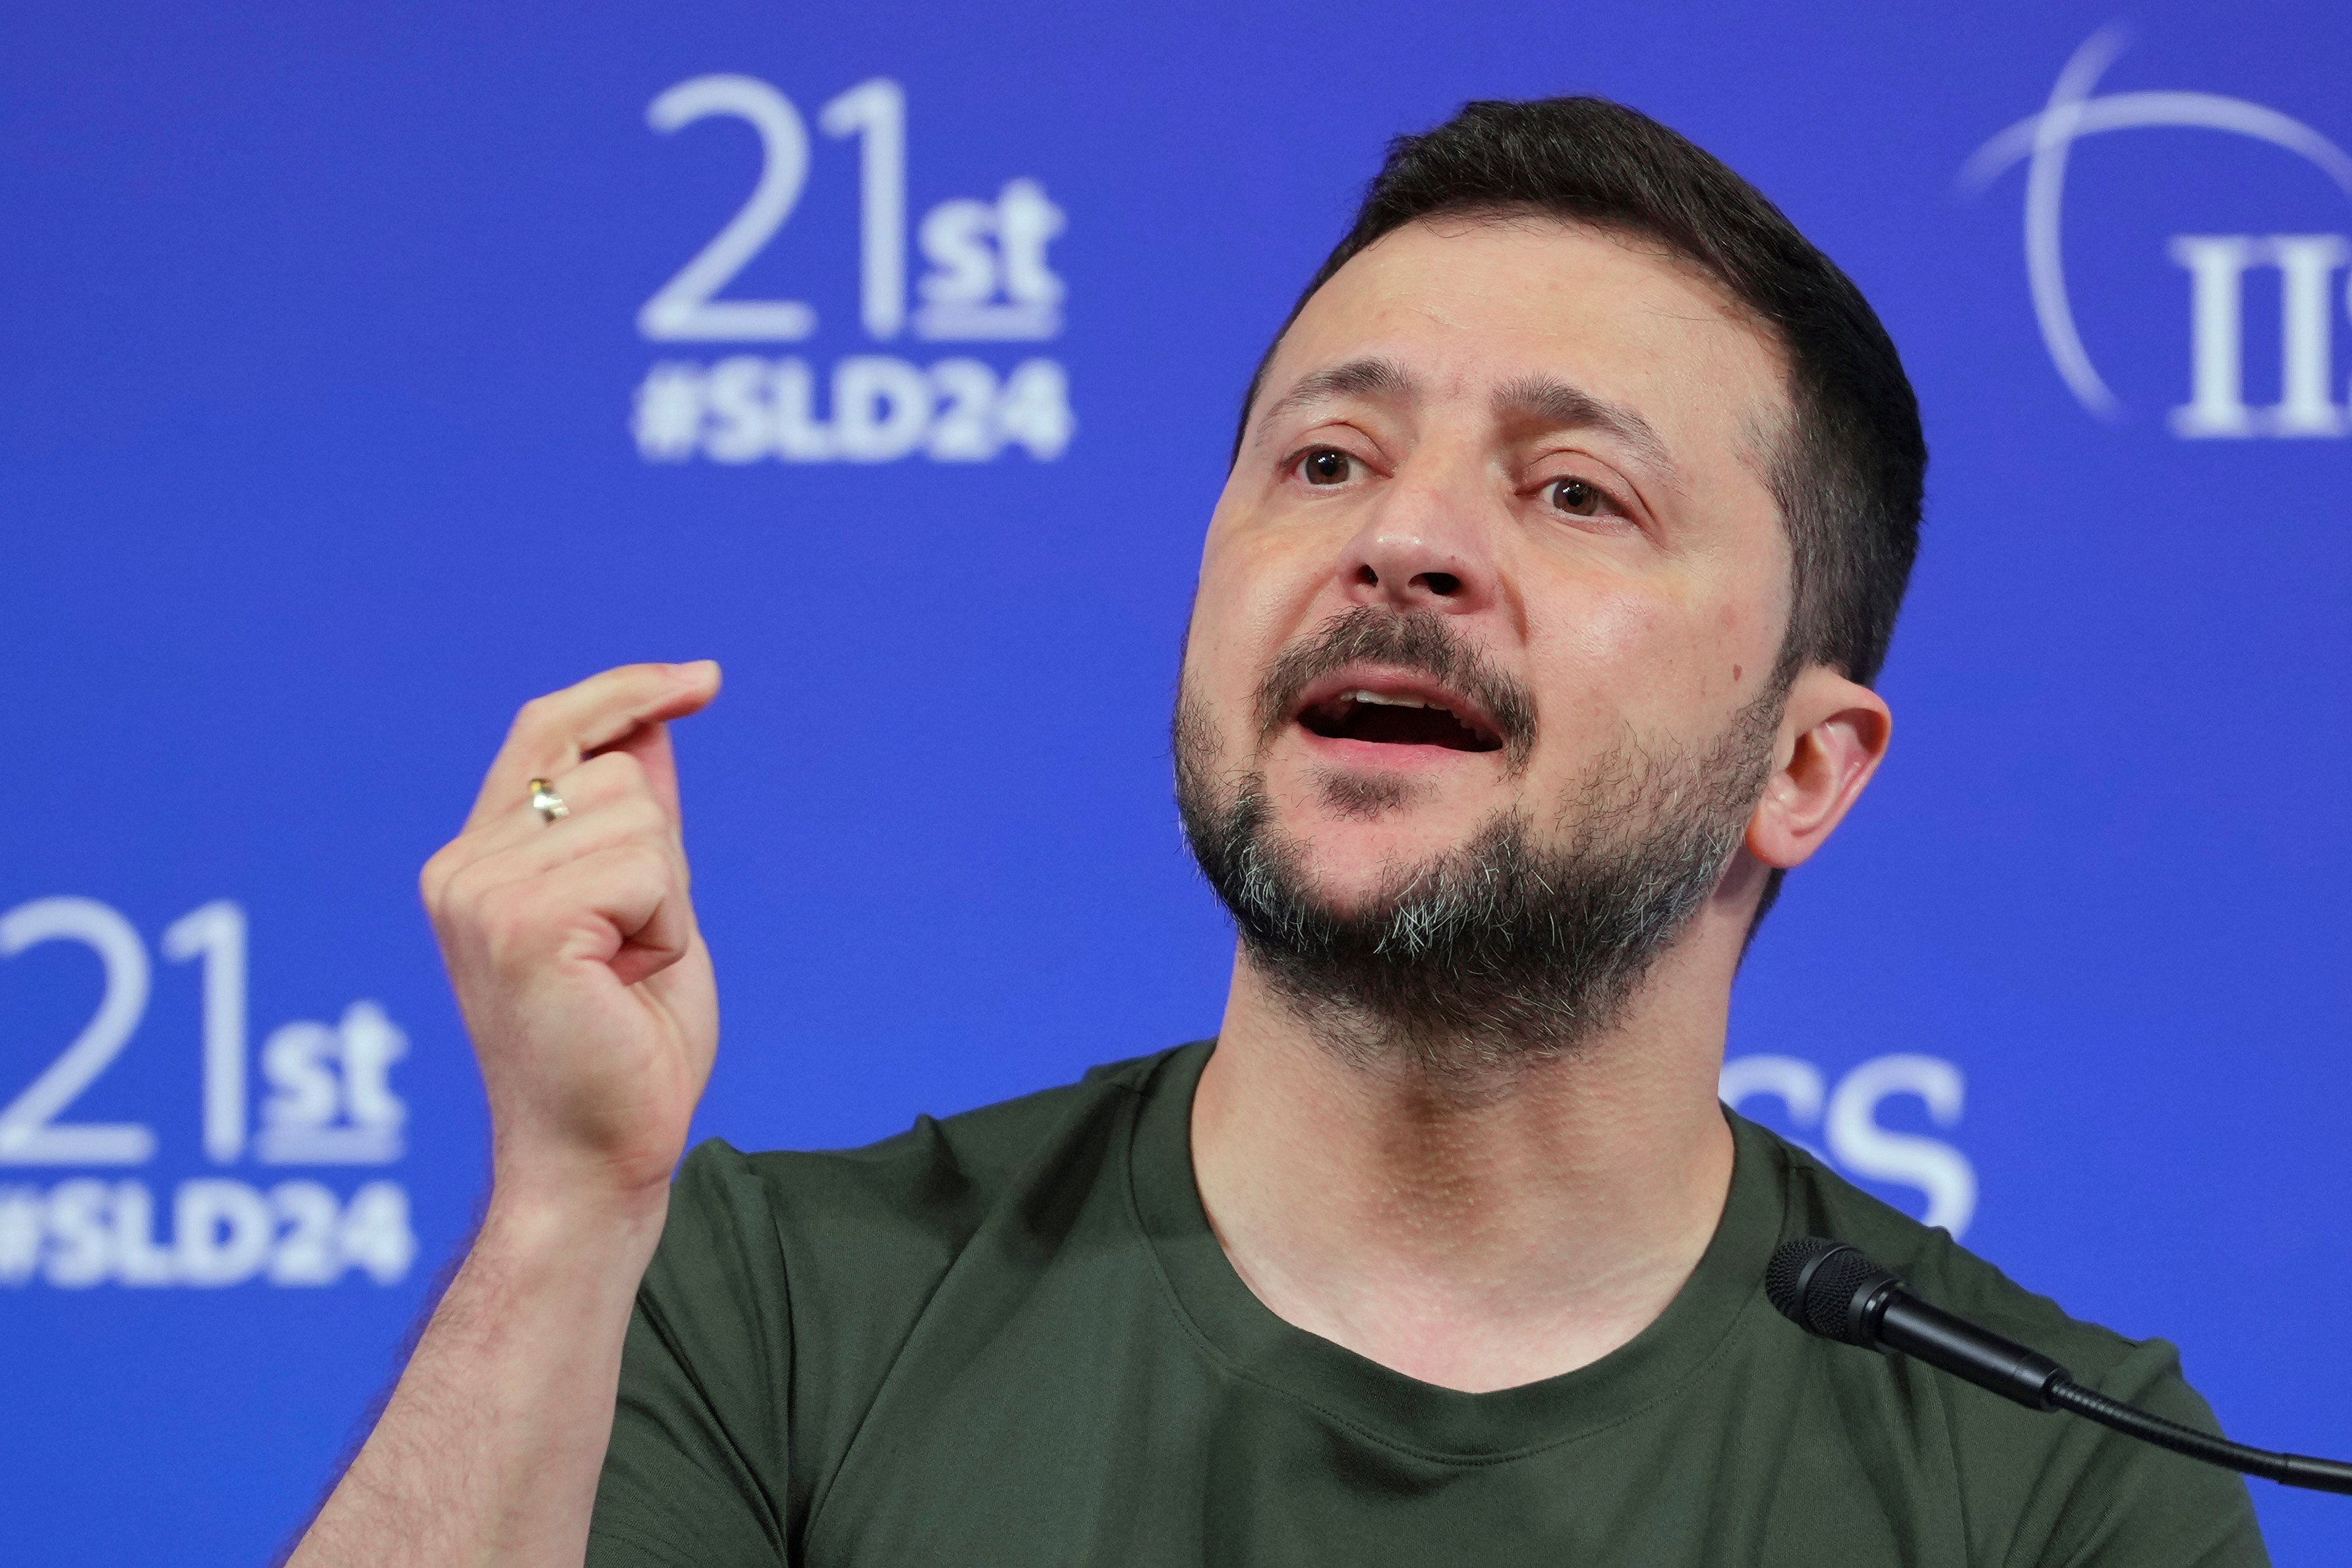 Ukrainian President Volodymyr Zelensky speaks during a press conference after the 21st Shangri-La Dialogue summit in Singapore on Sunday. Photo: AP